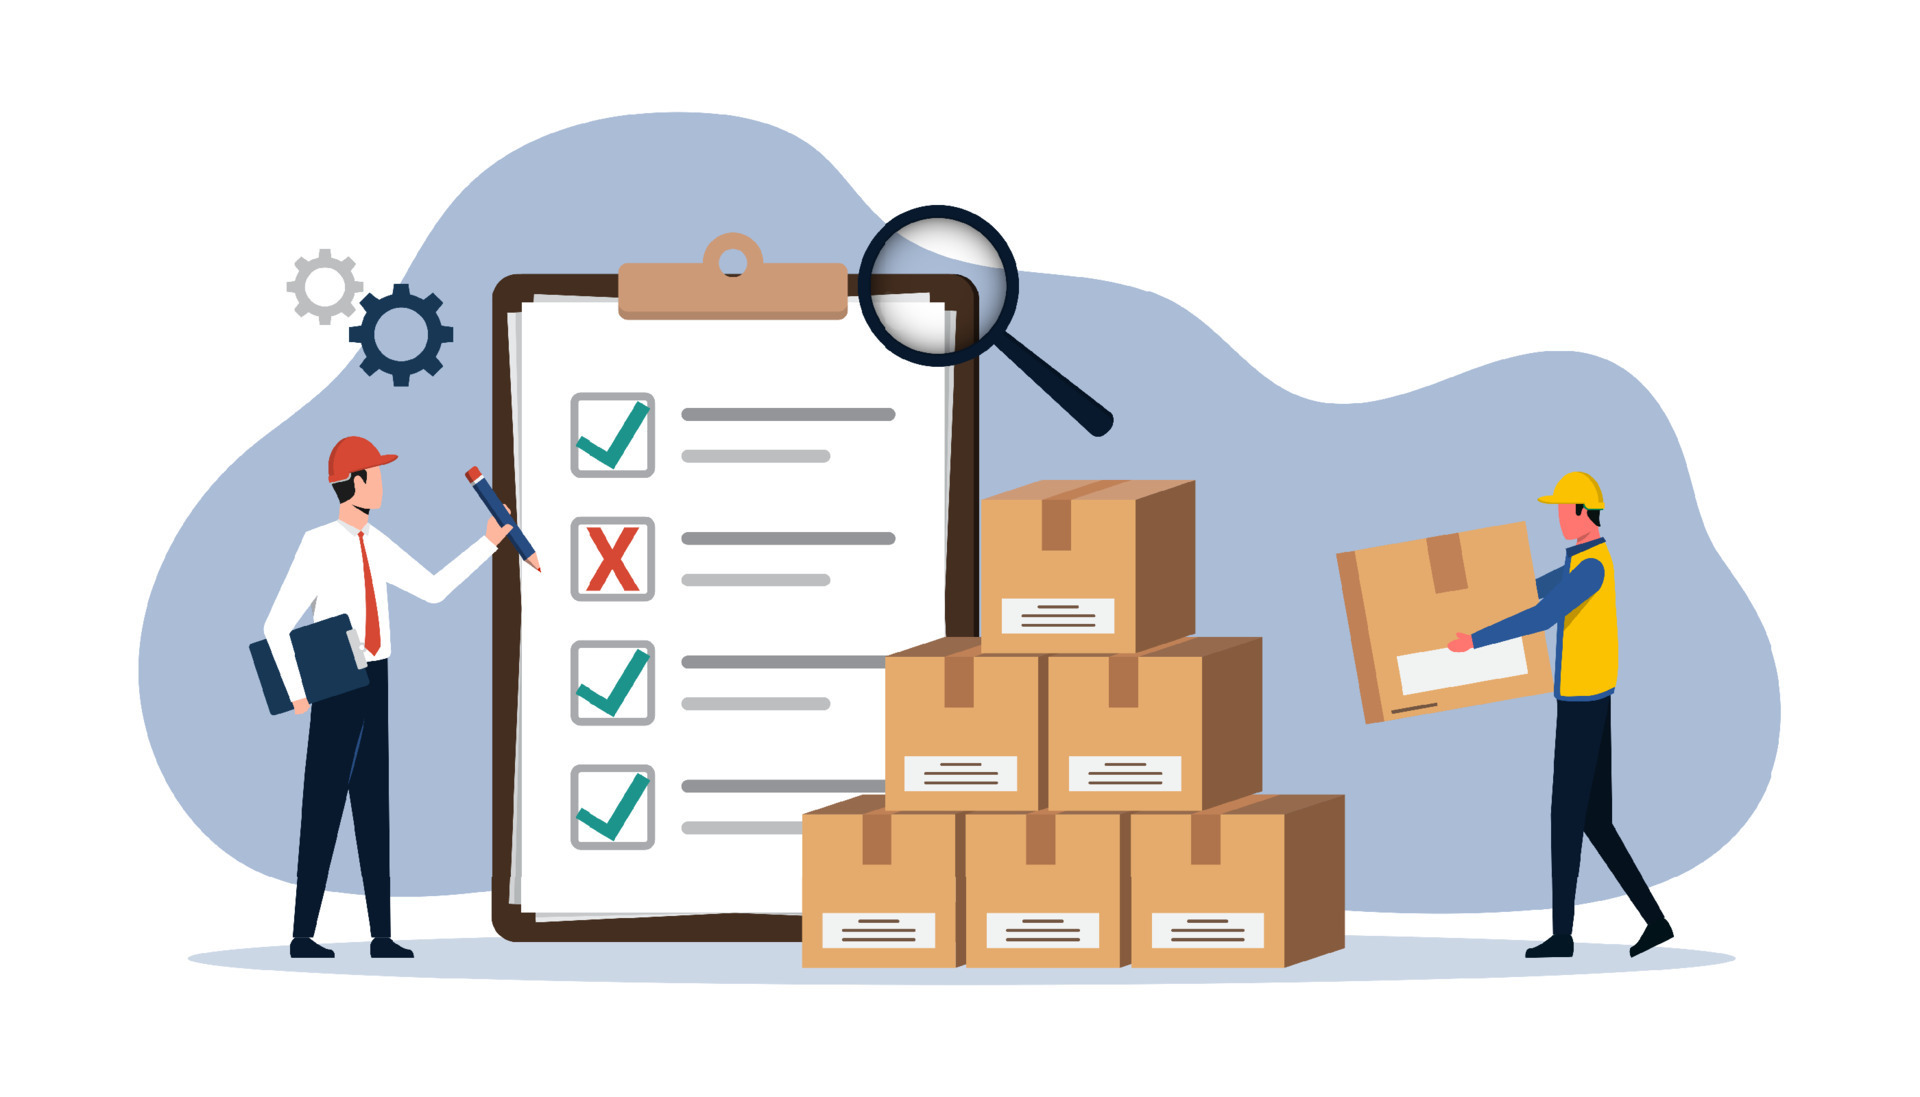 How to Optimise Inventory Management to Avoid 'No Stock' OR Waste?